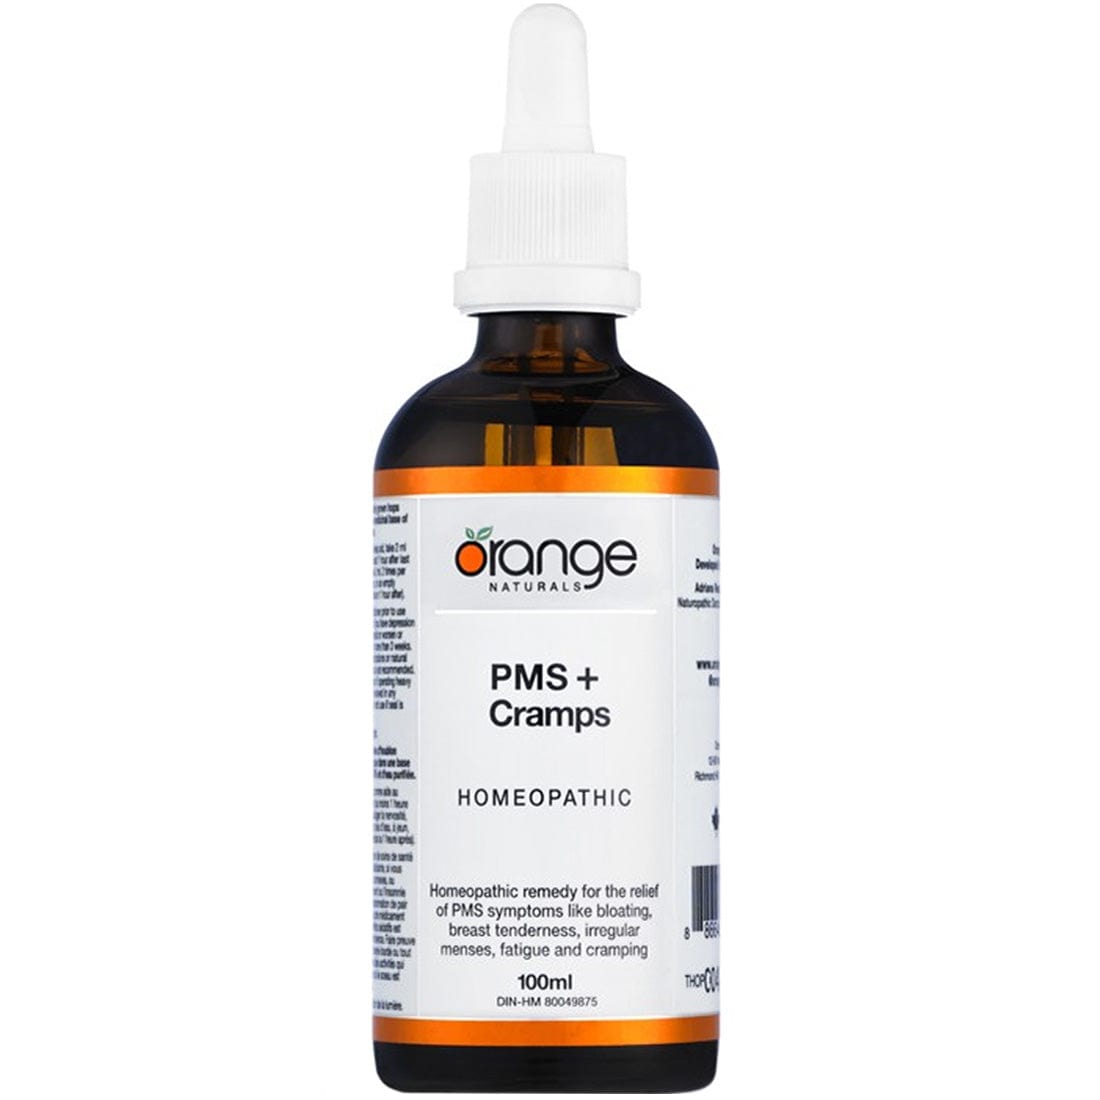 Orange Naturals PMS+Cramps Homeopathic Remedy, 100ml